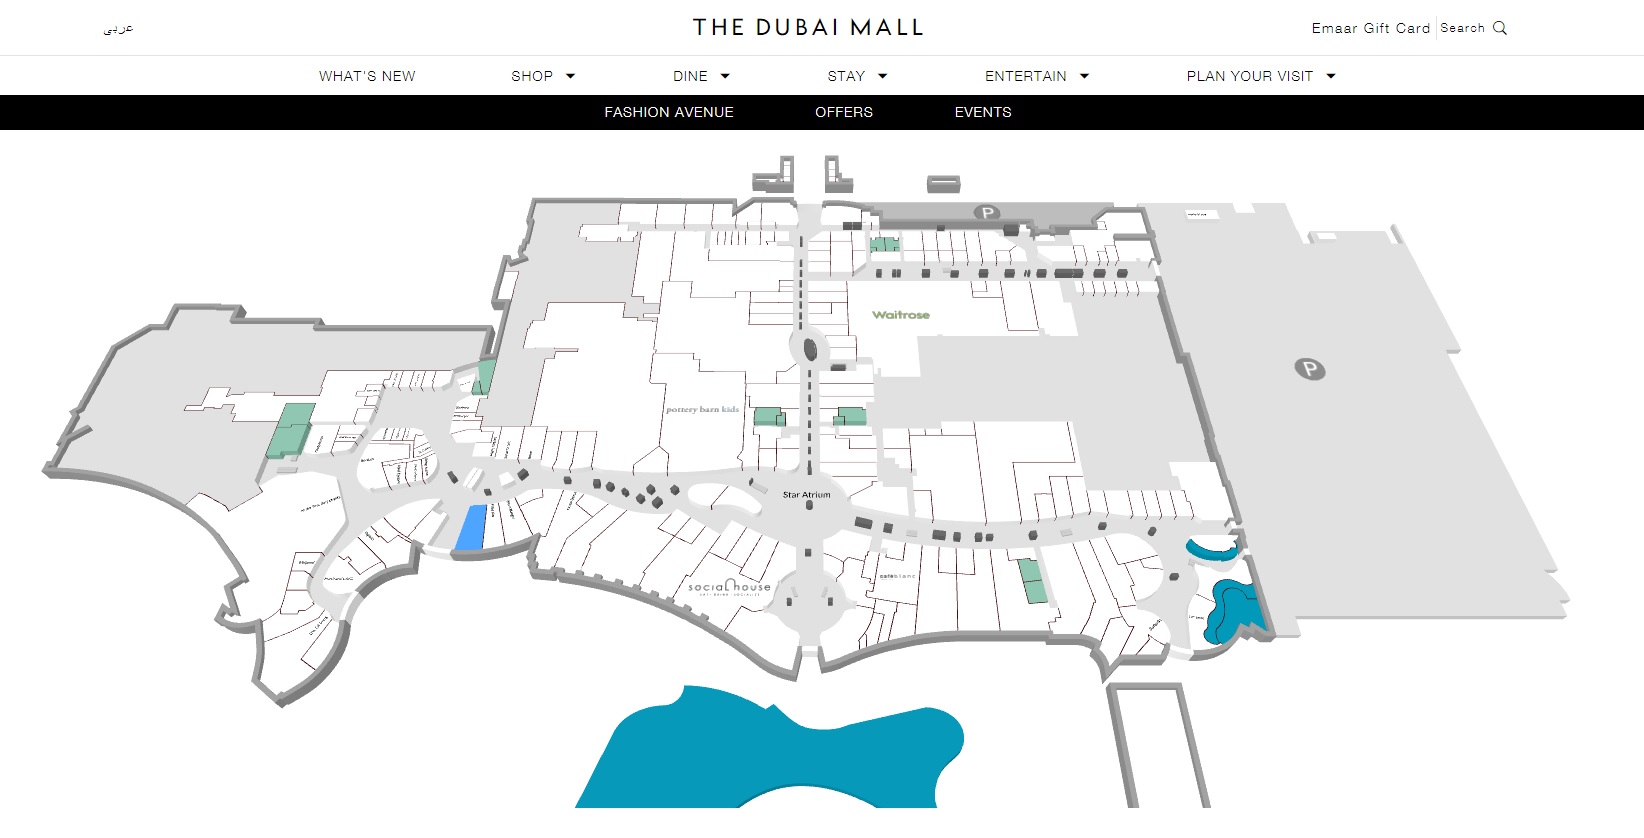 Dubai Mall How To Walk Without Getting Lost Utilization And